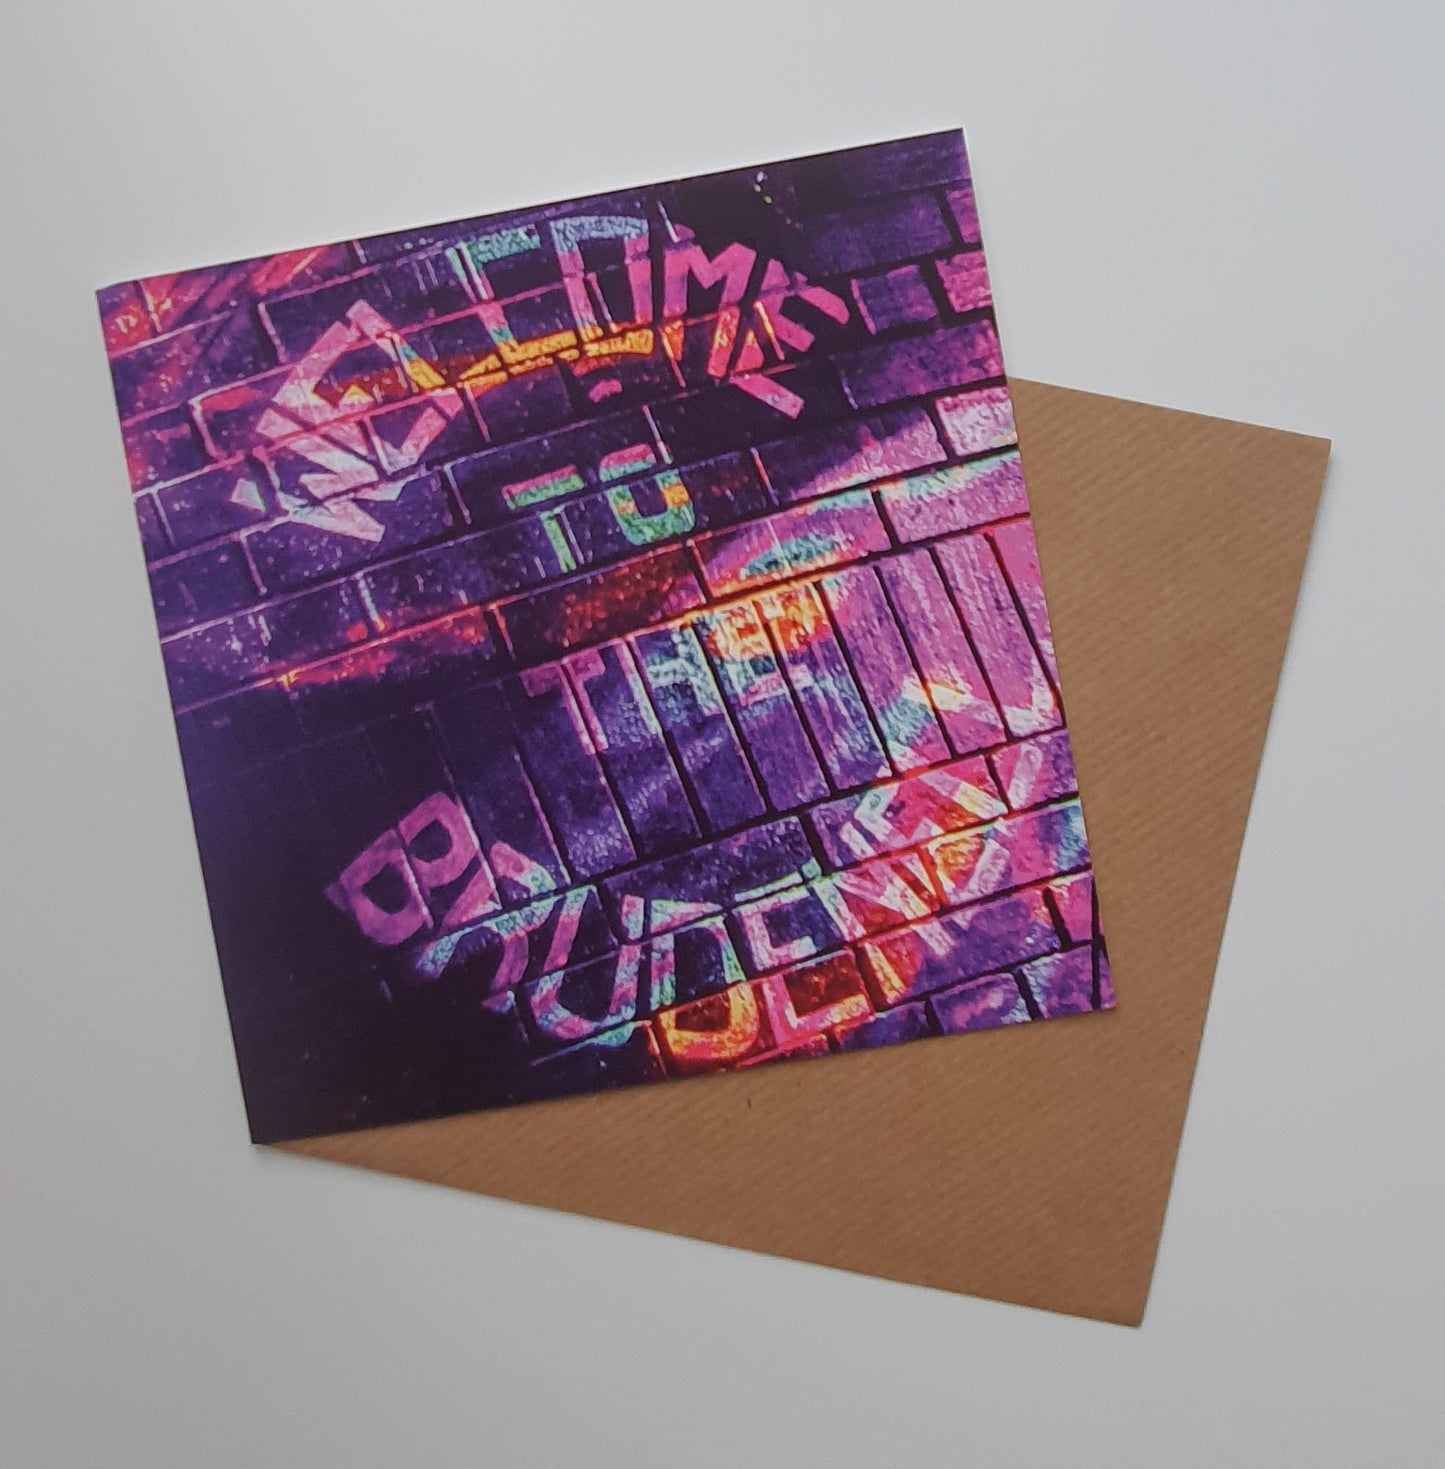 Brudenell Social Club 'Welcome to the Brudenell' art card